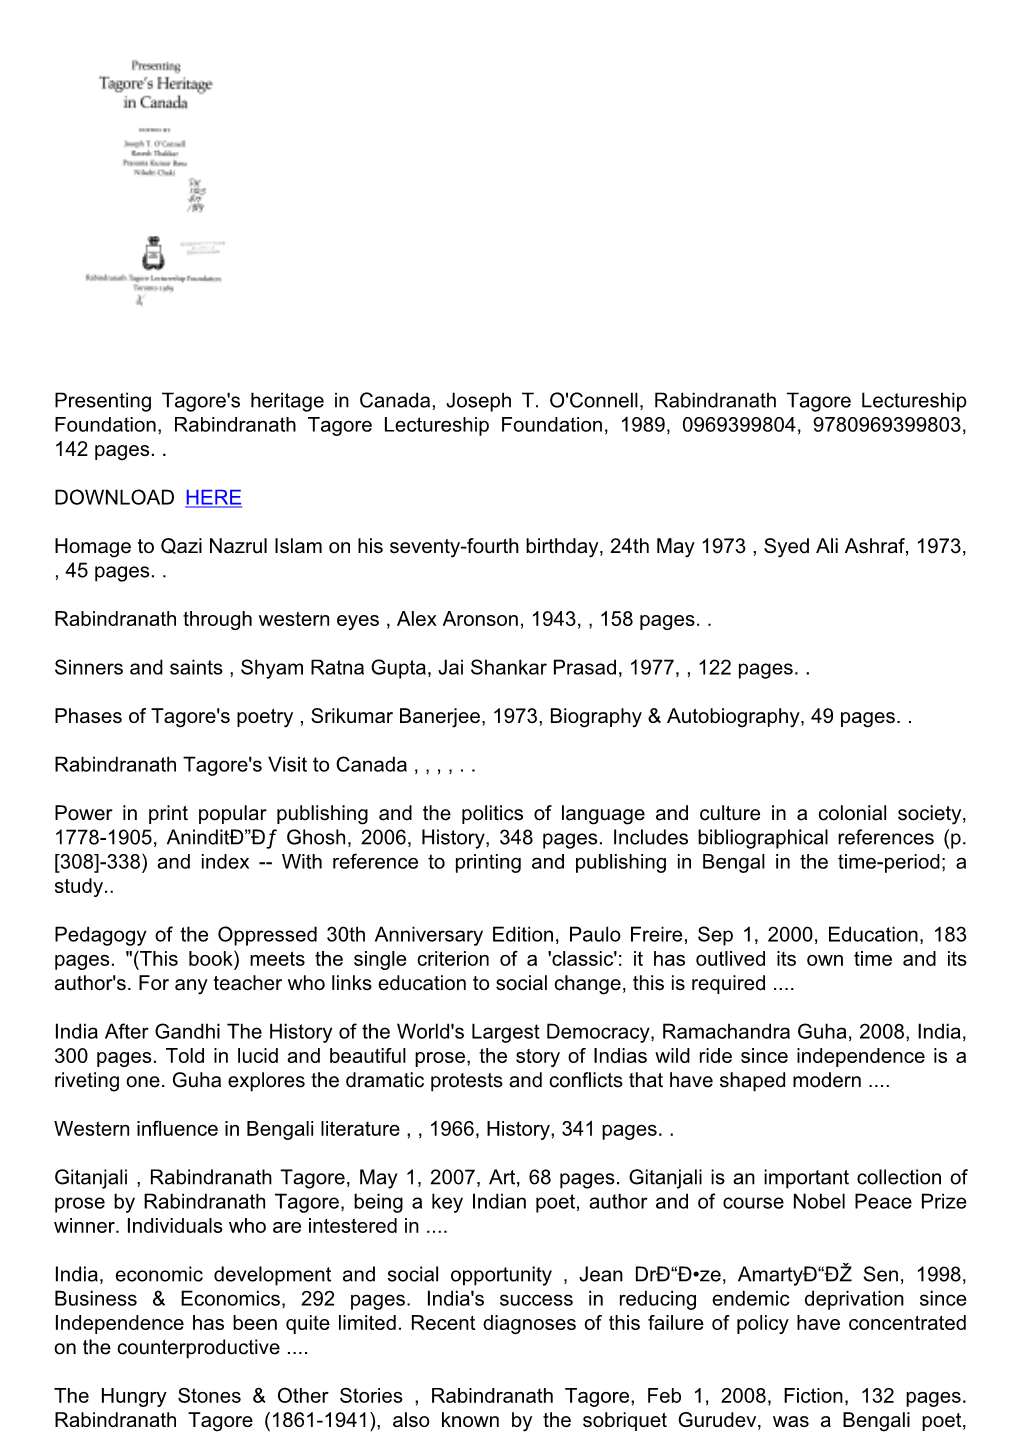 Download Presenting Tagore's Heritage in Canada, Joseph T. O'connell, Rabindranath Tagore Lectureship Foundation, Rabind